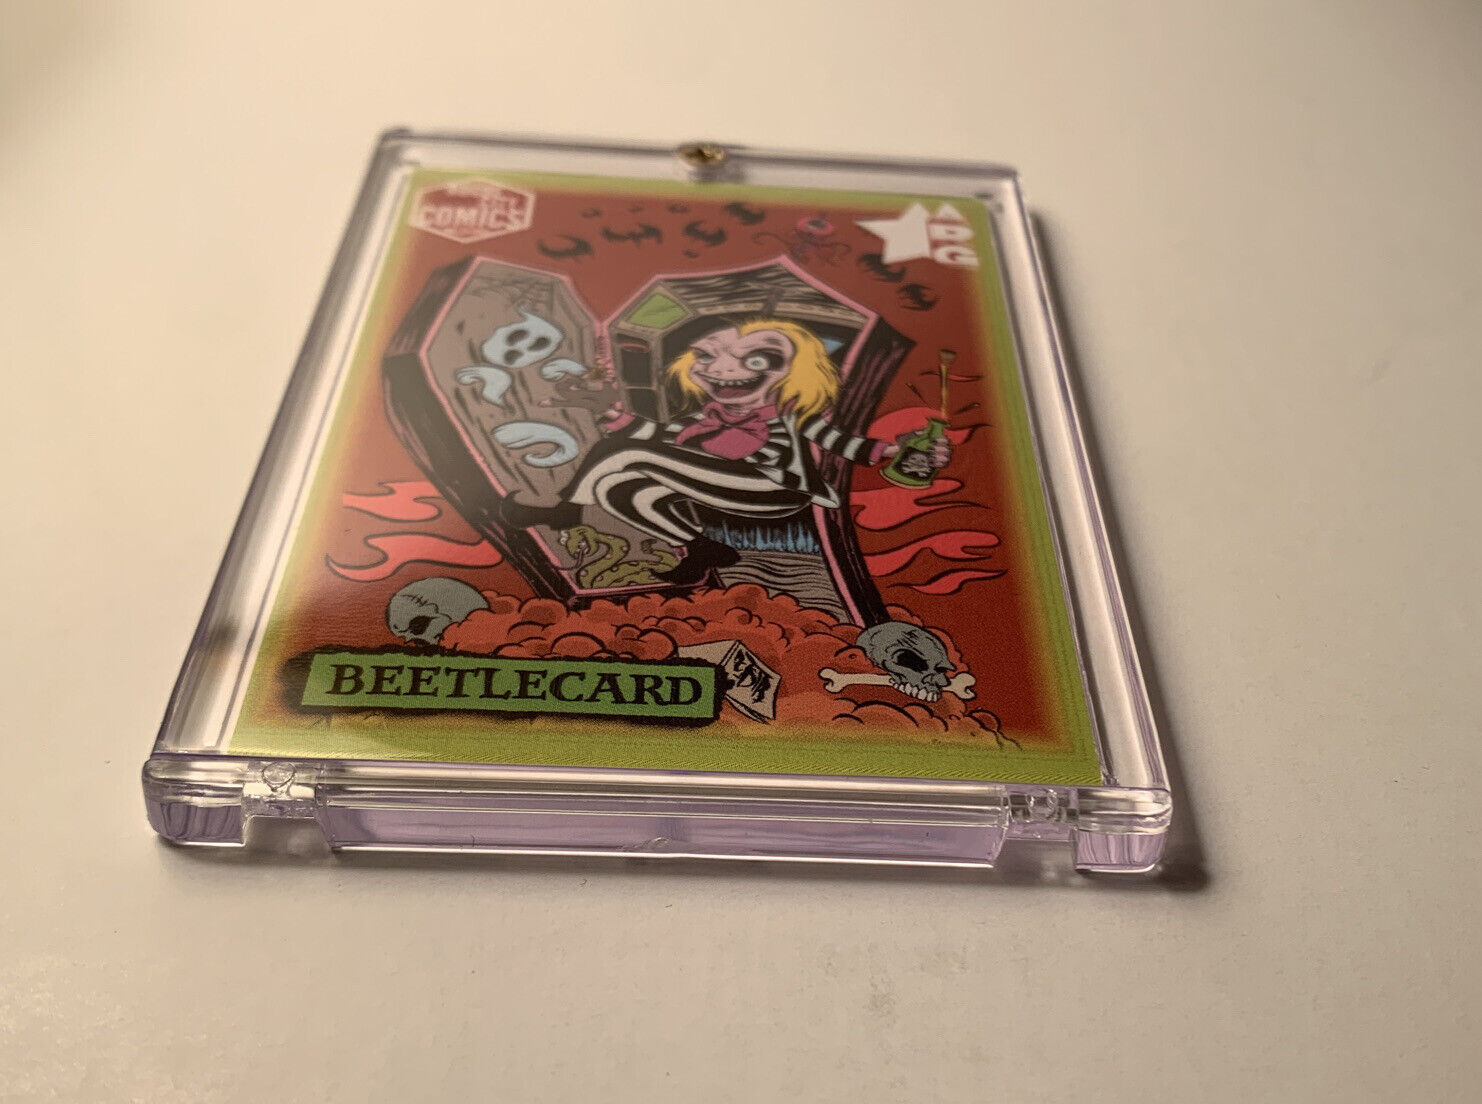 Beetlejuice Card ARG Rogue City Comics Medford Exclusive Trading Card Signed #